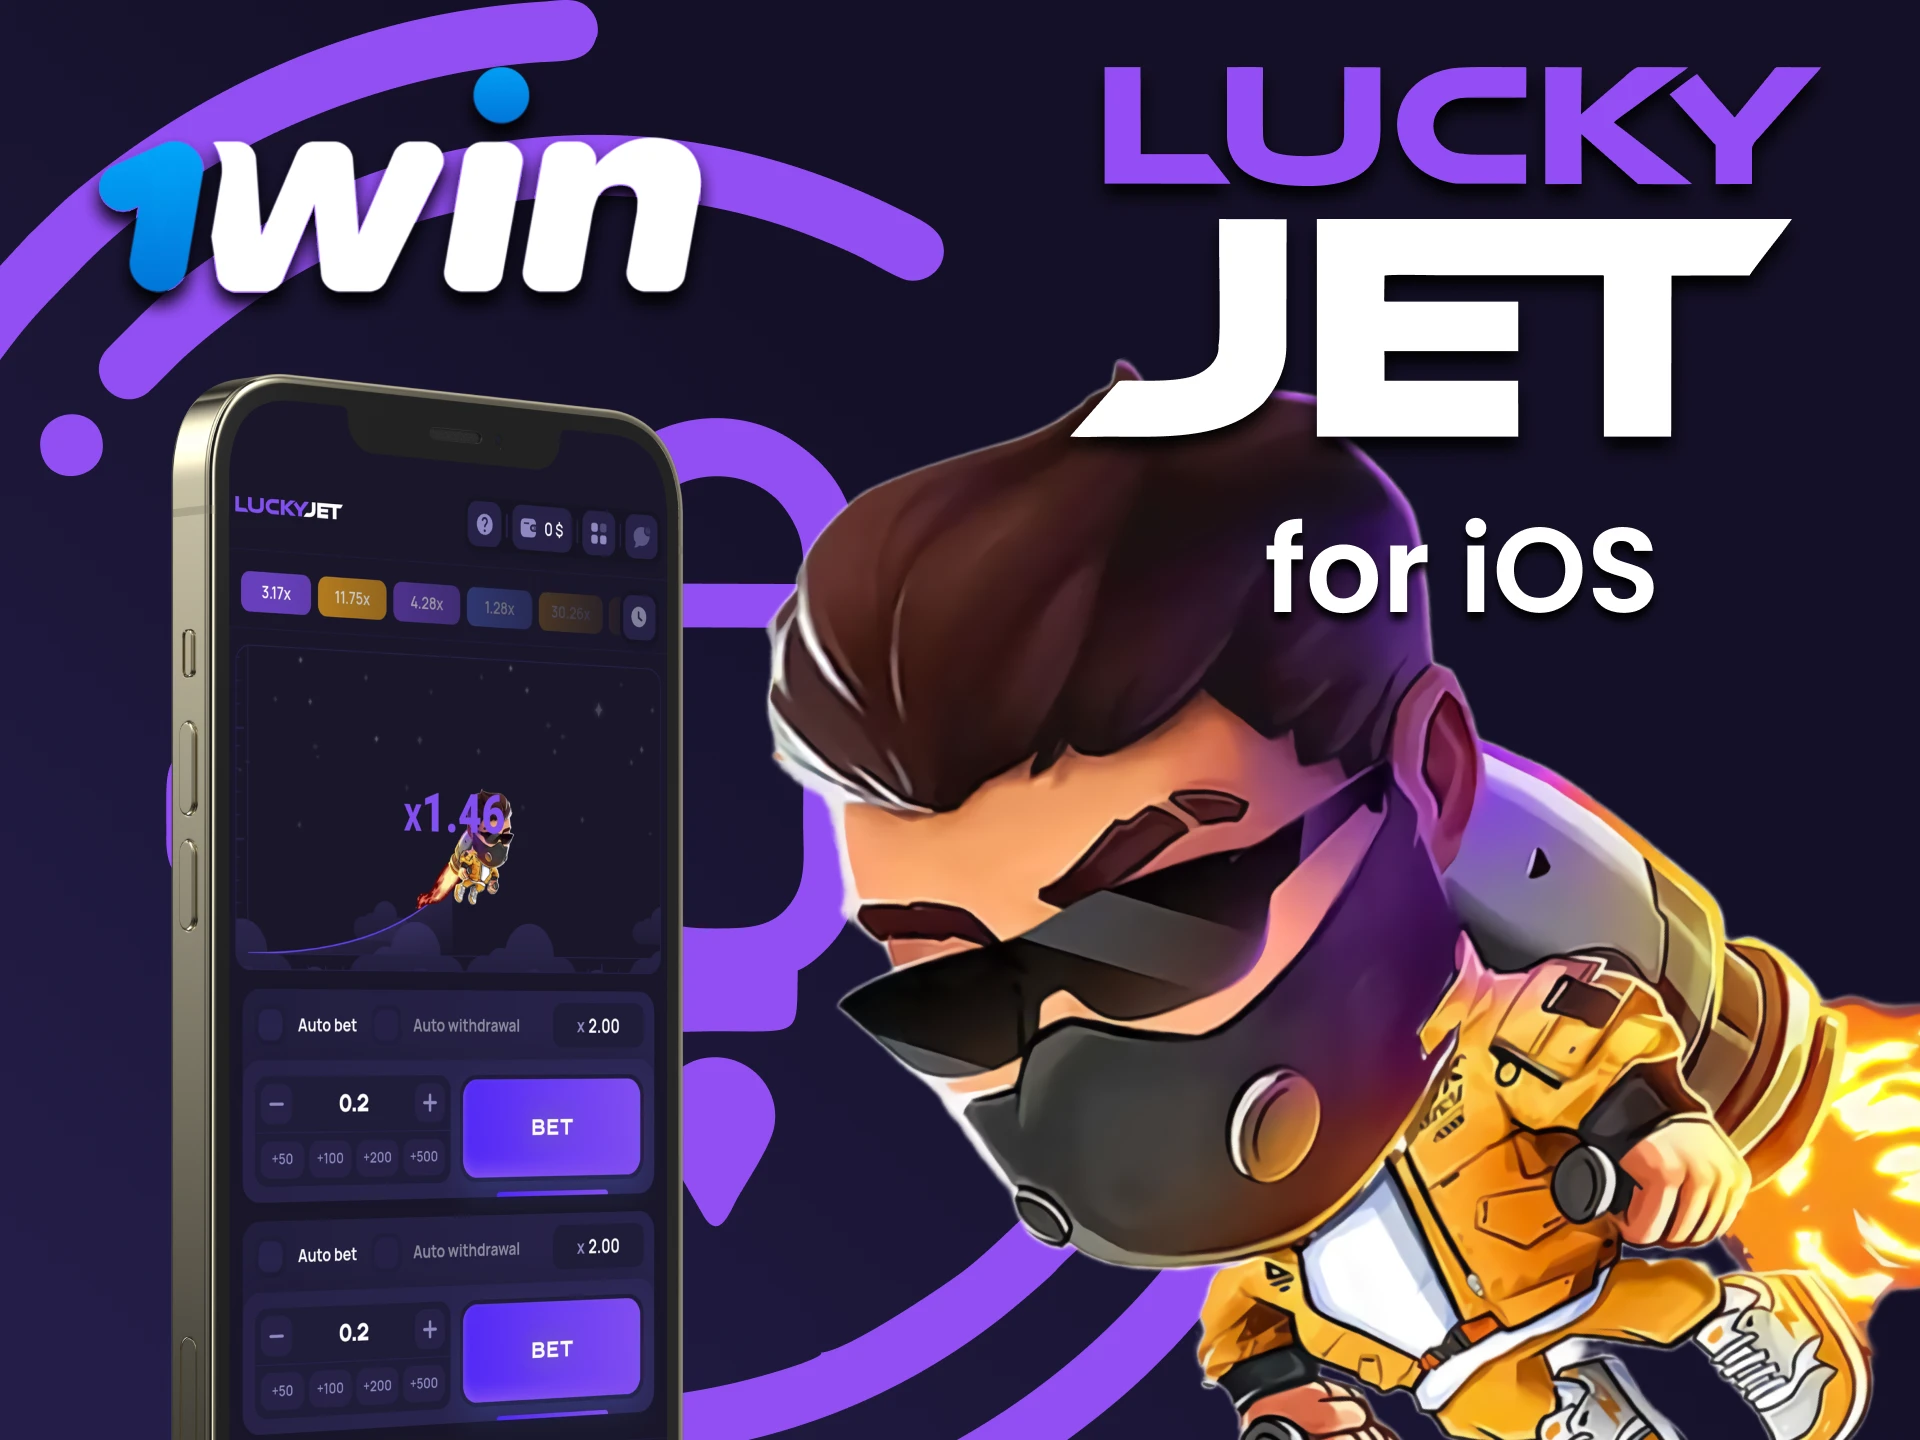 Play Lucky Jet with the 1win iOS app.